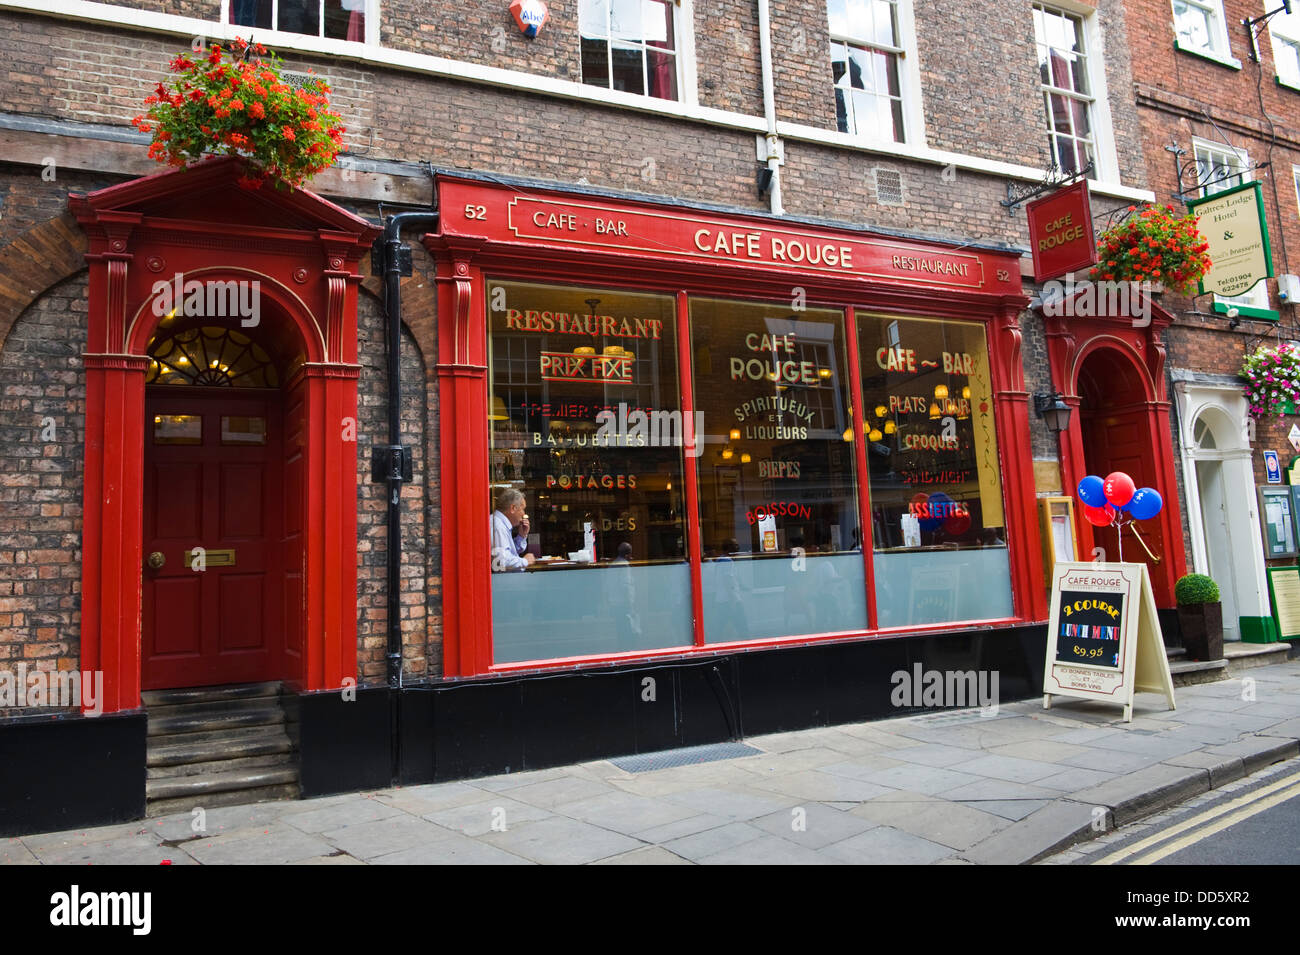 CAFE ROUGE French restaurant in city centre of York North Yorkshire England UK Stock Photo